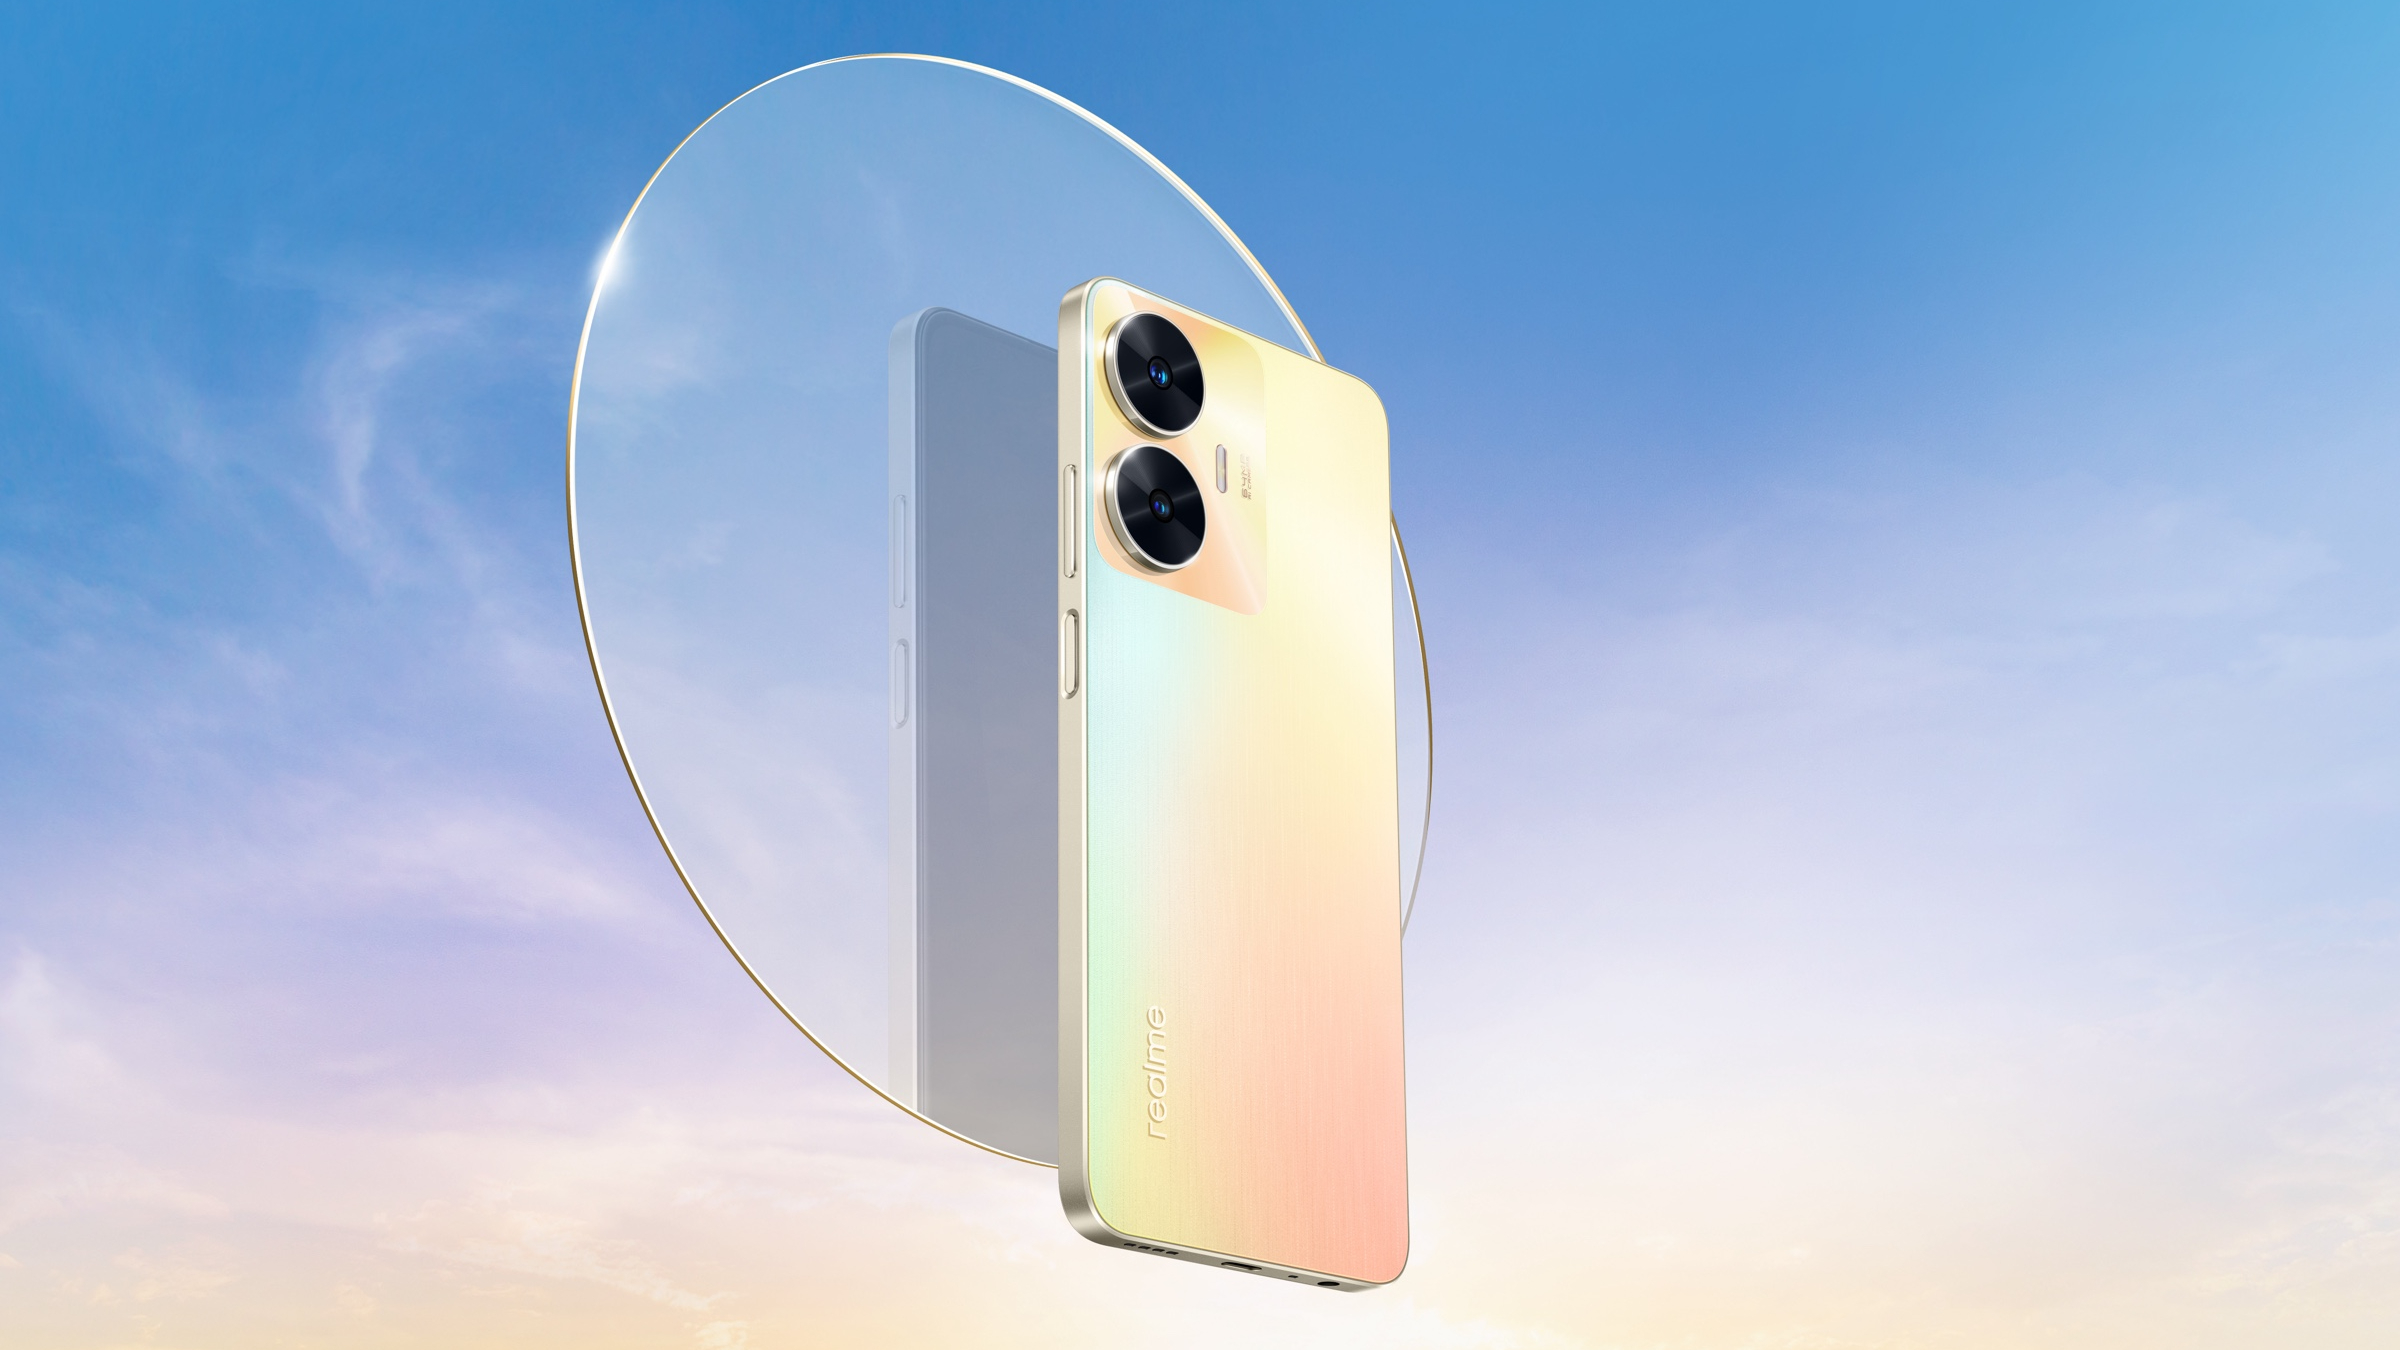 The Realme C55 in Sunshower colorway